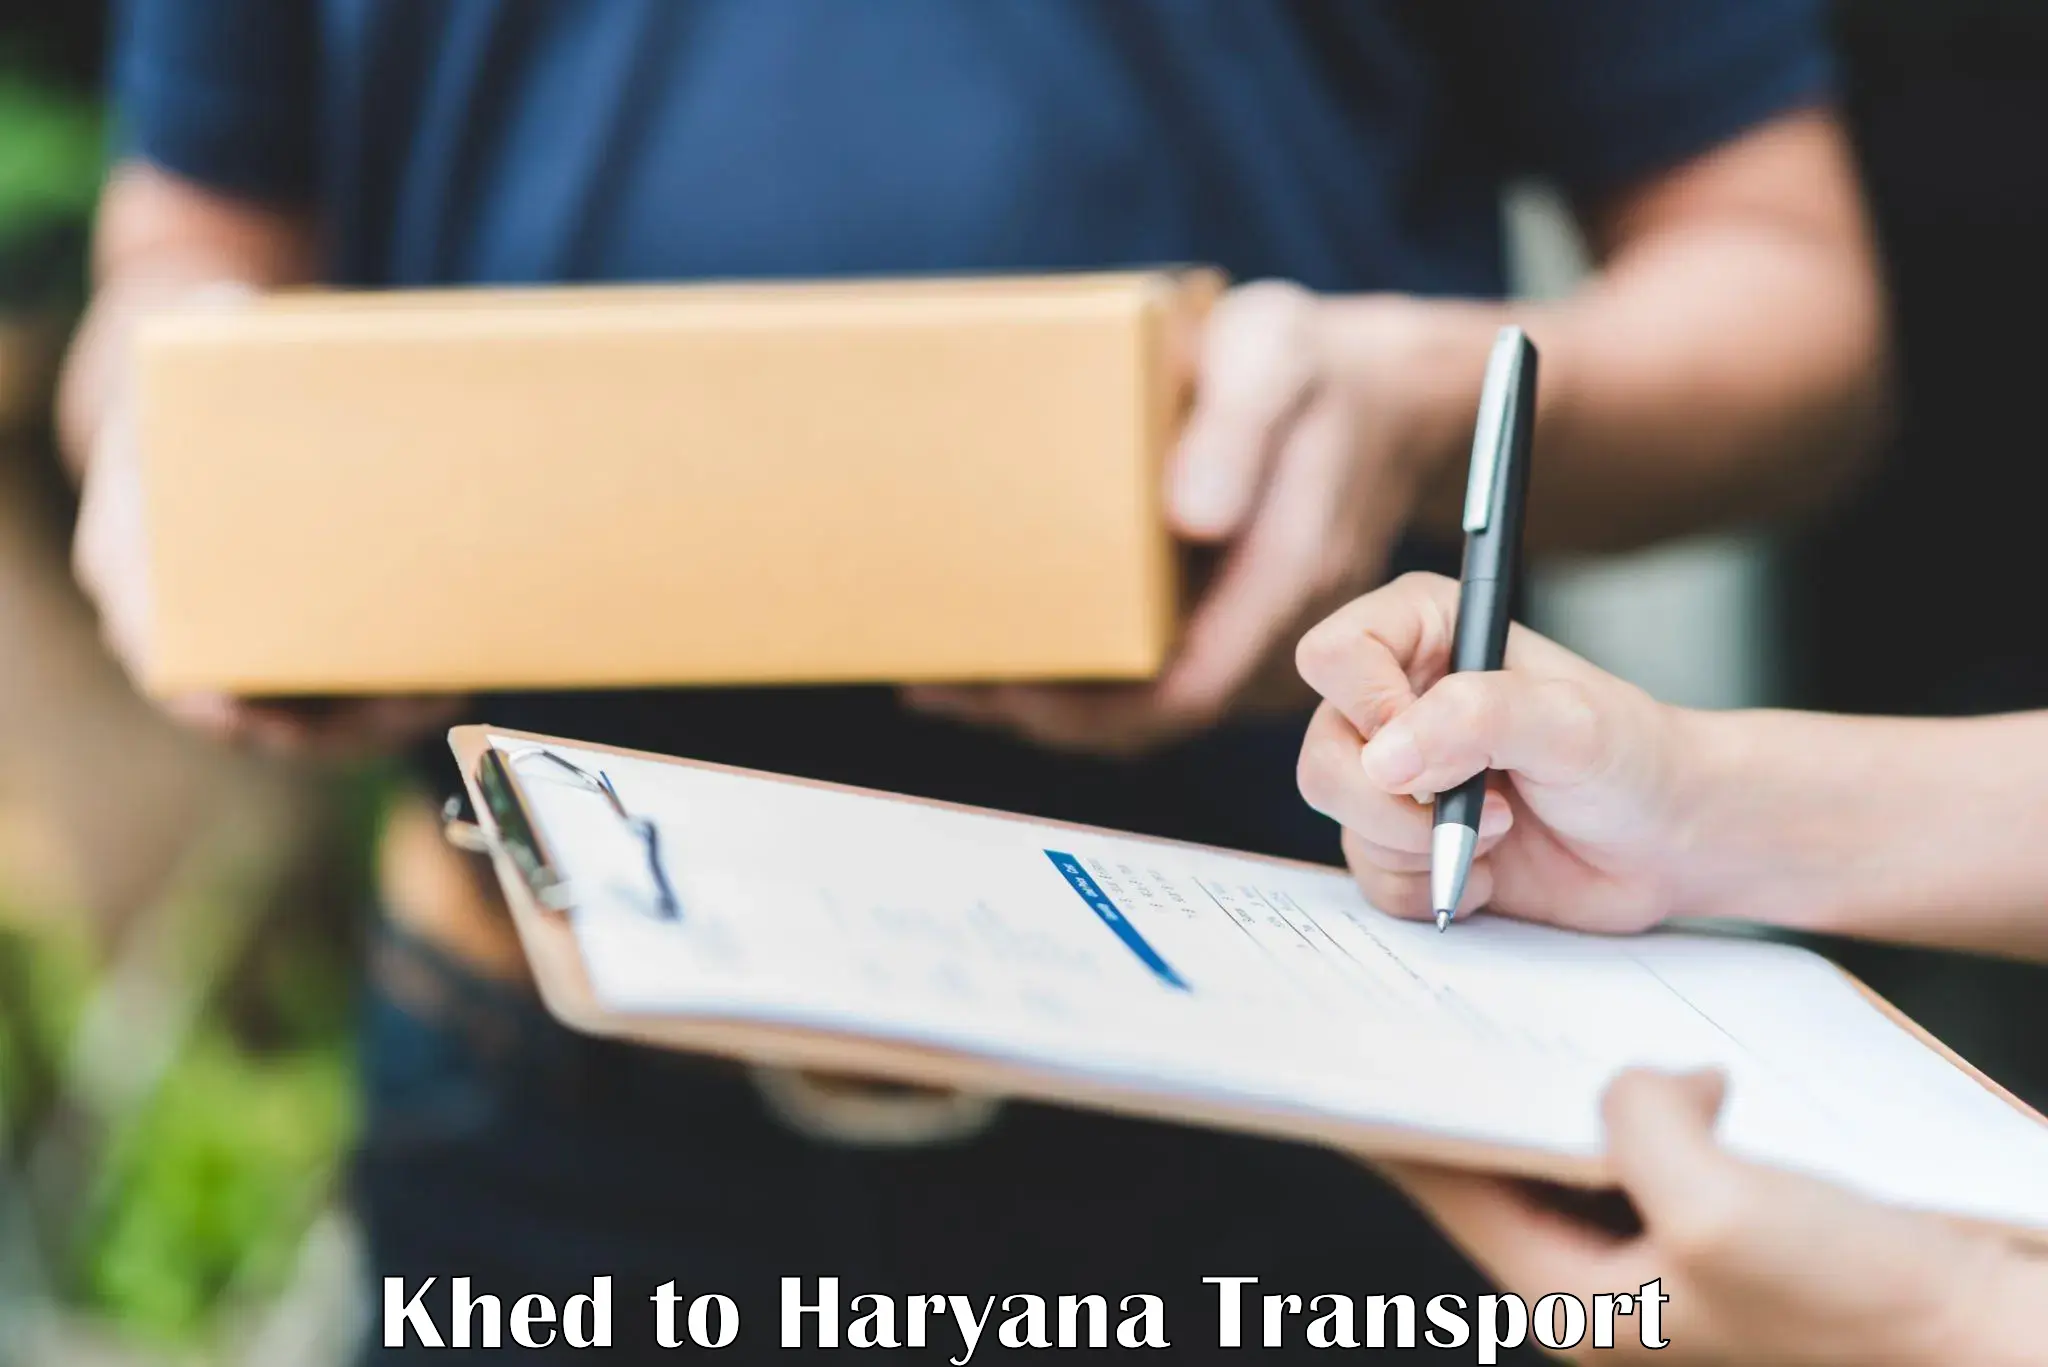 Two wheeler transport services Khed to Panipat